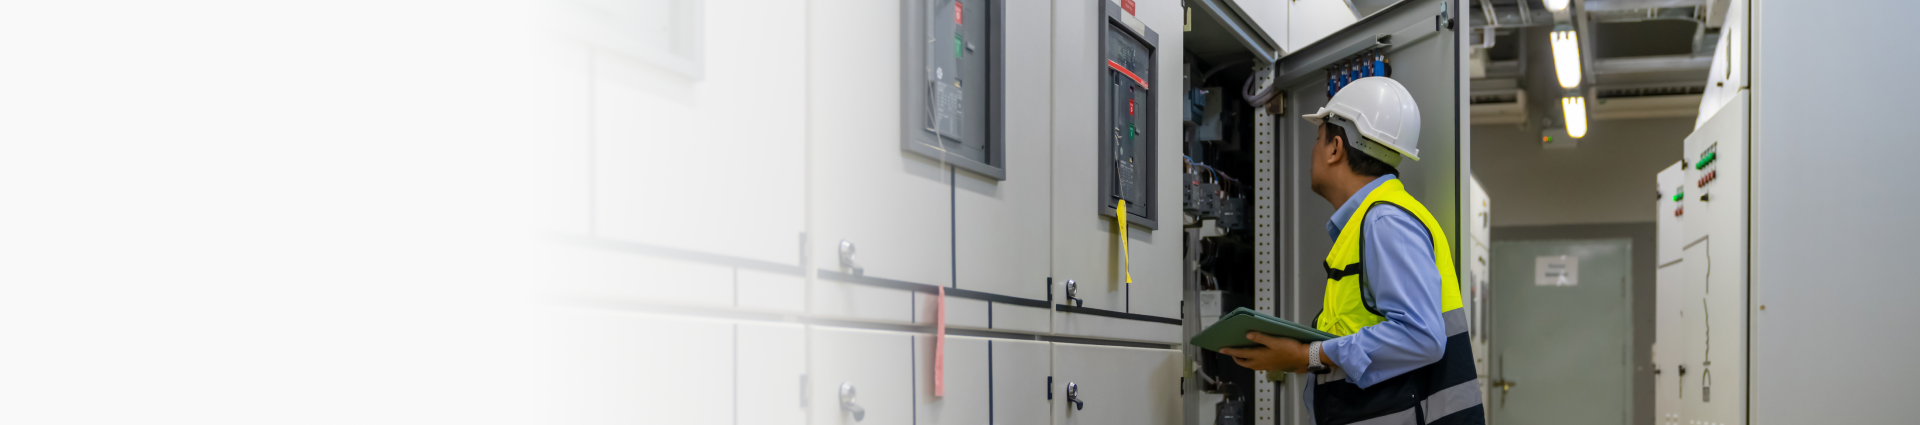 A technician inspects an electrical panel with a tablet in an industrial setting.